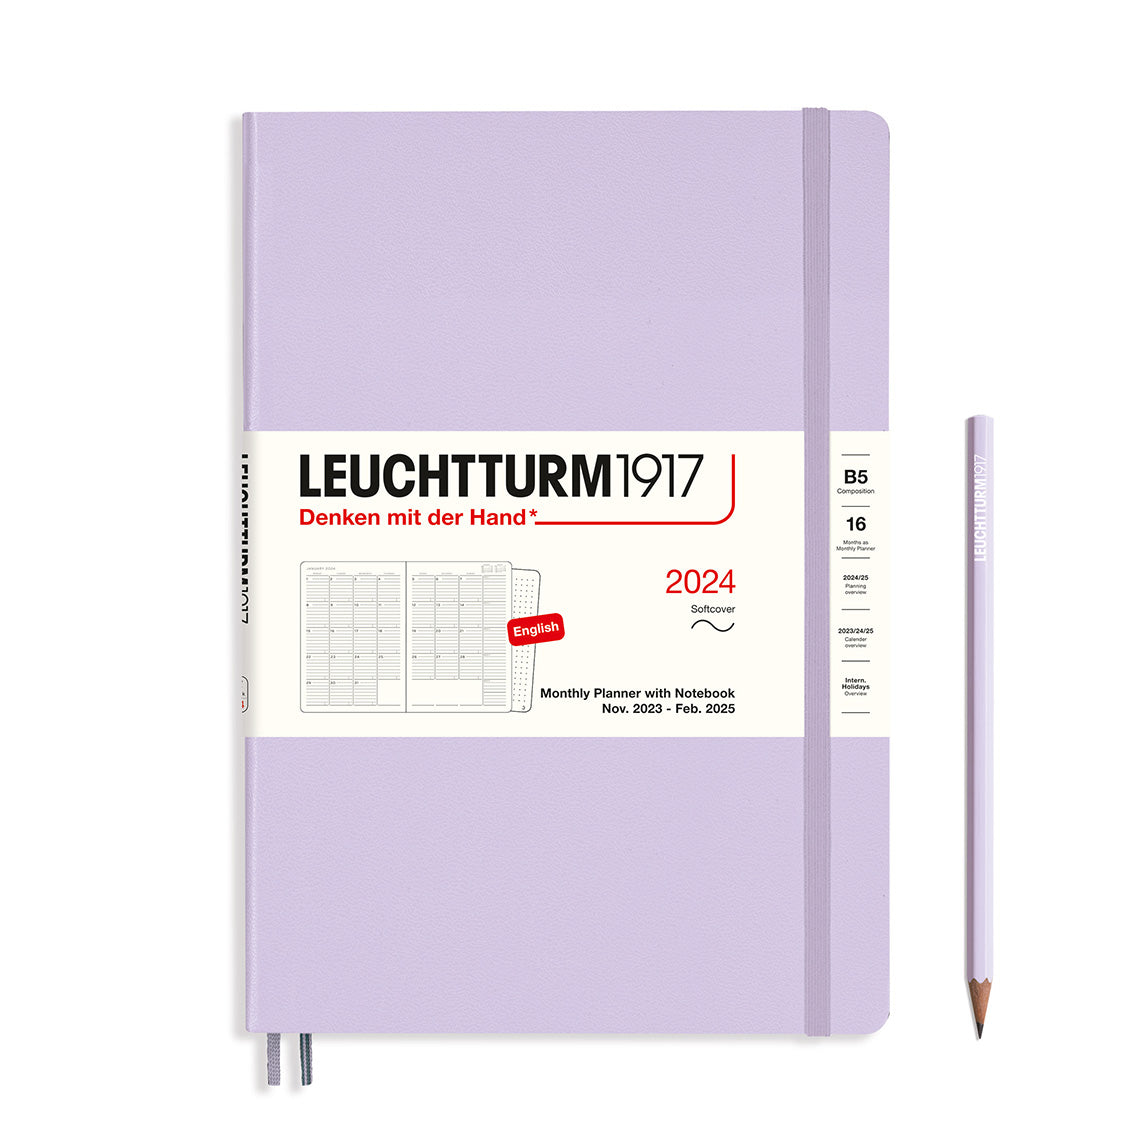 LEUCHTTURM1917 Monthly Planner & Notebook Composition (B5) 2024, Lilac - Blesket Canada